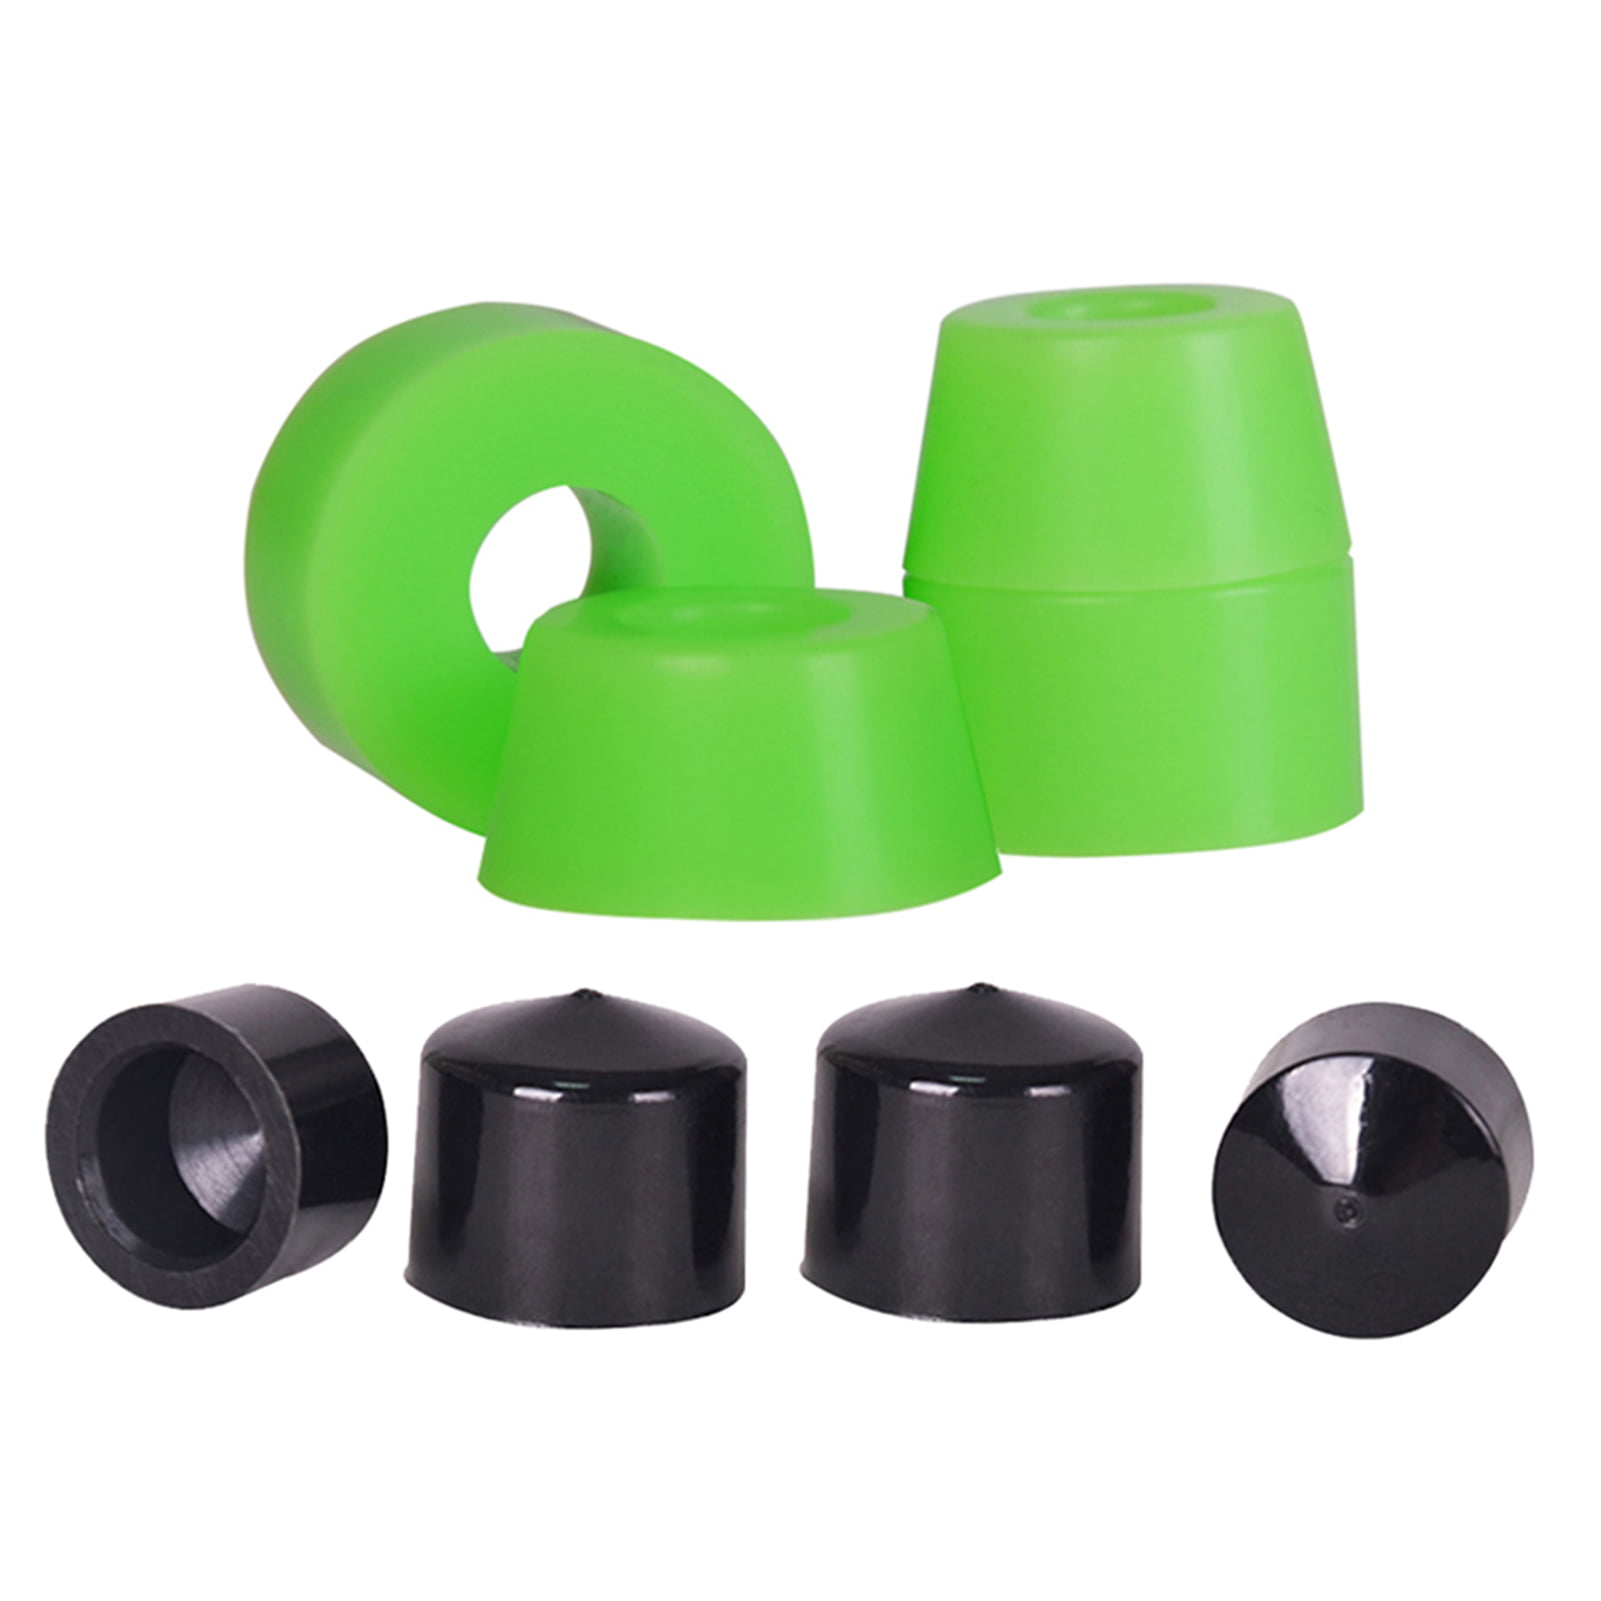 4Pcs Skateboard Shock Absorber Anti Vibration Outdoor Sports For Children Adults 